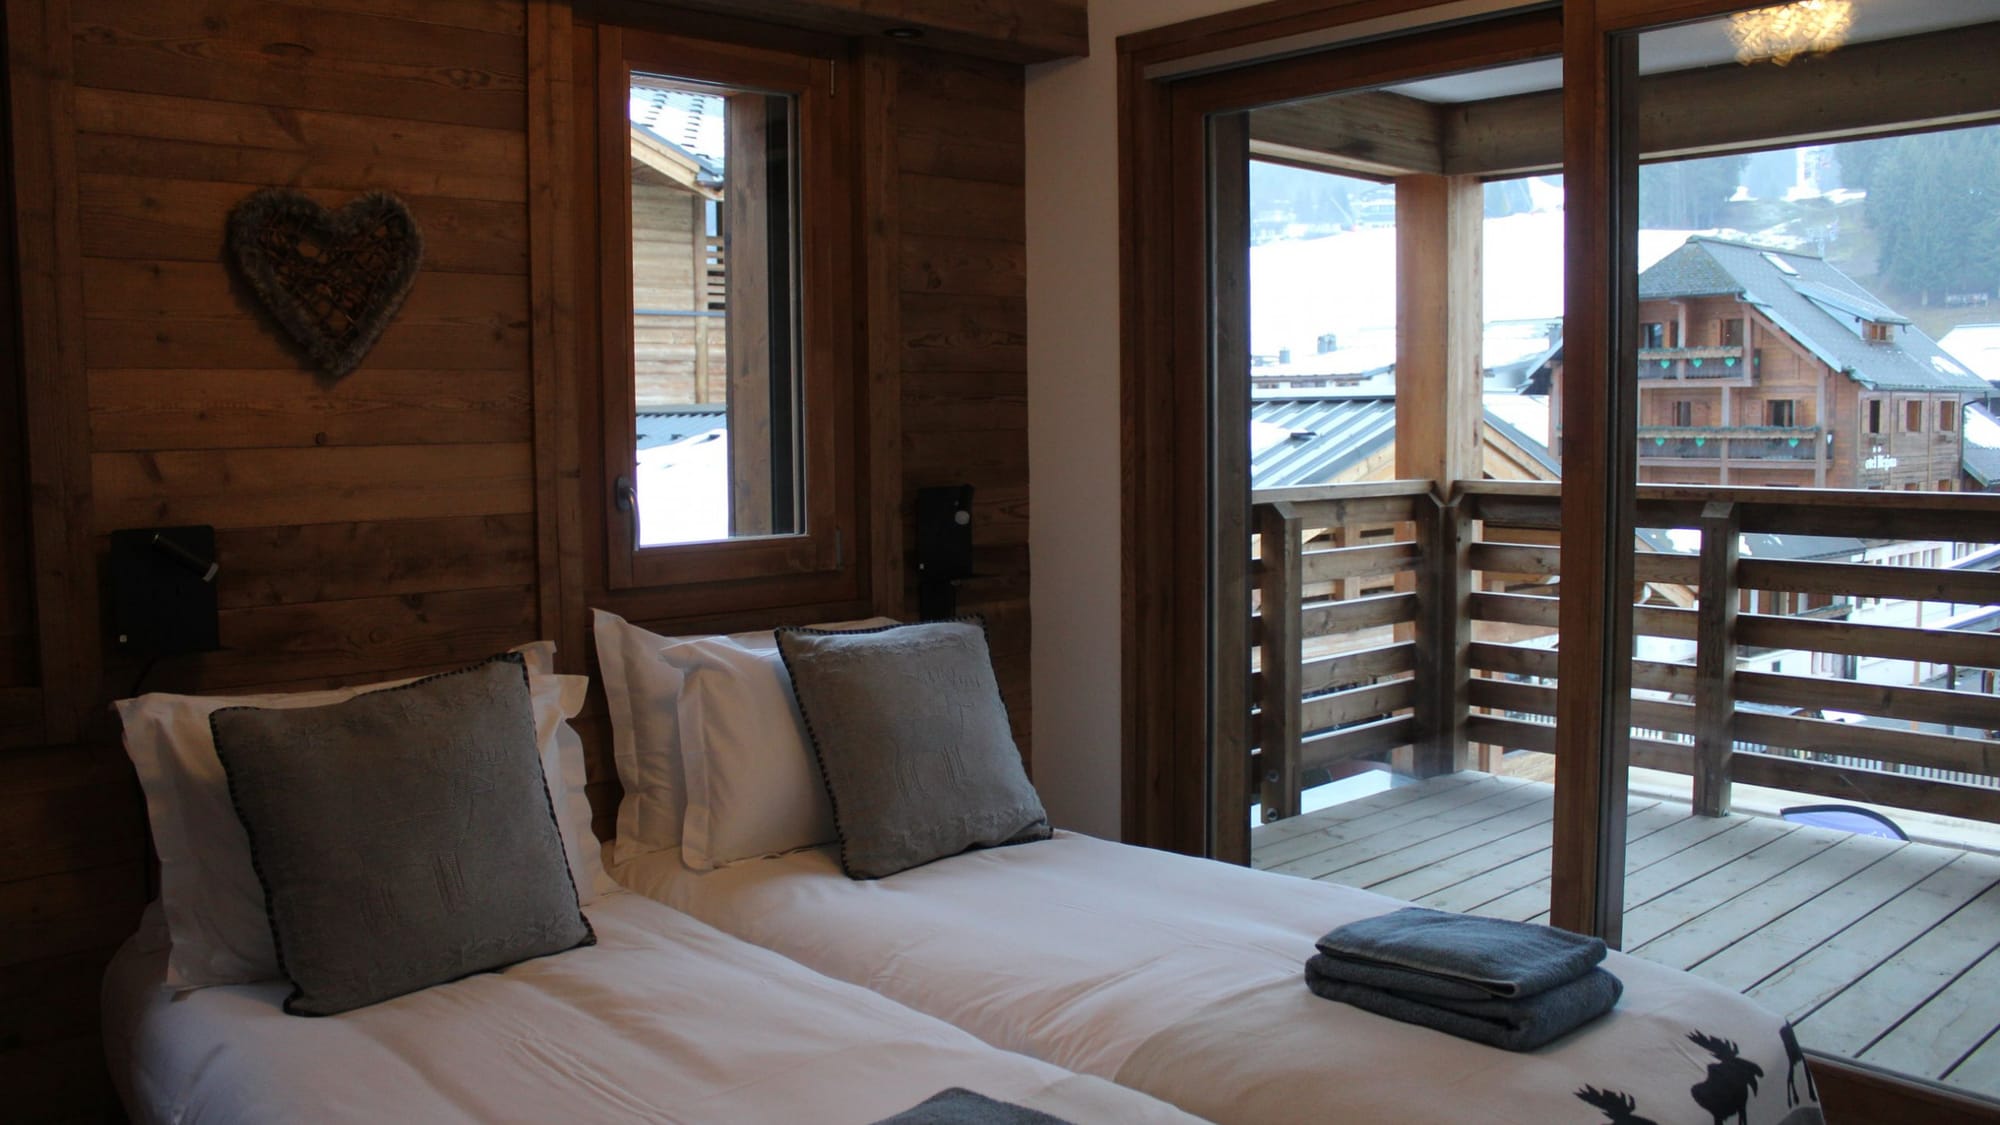 Master bedroom with balcony and view on snowy village